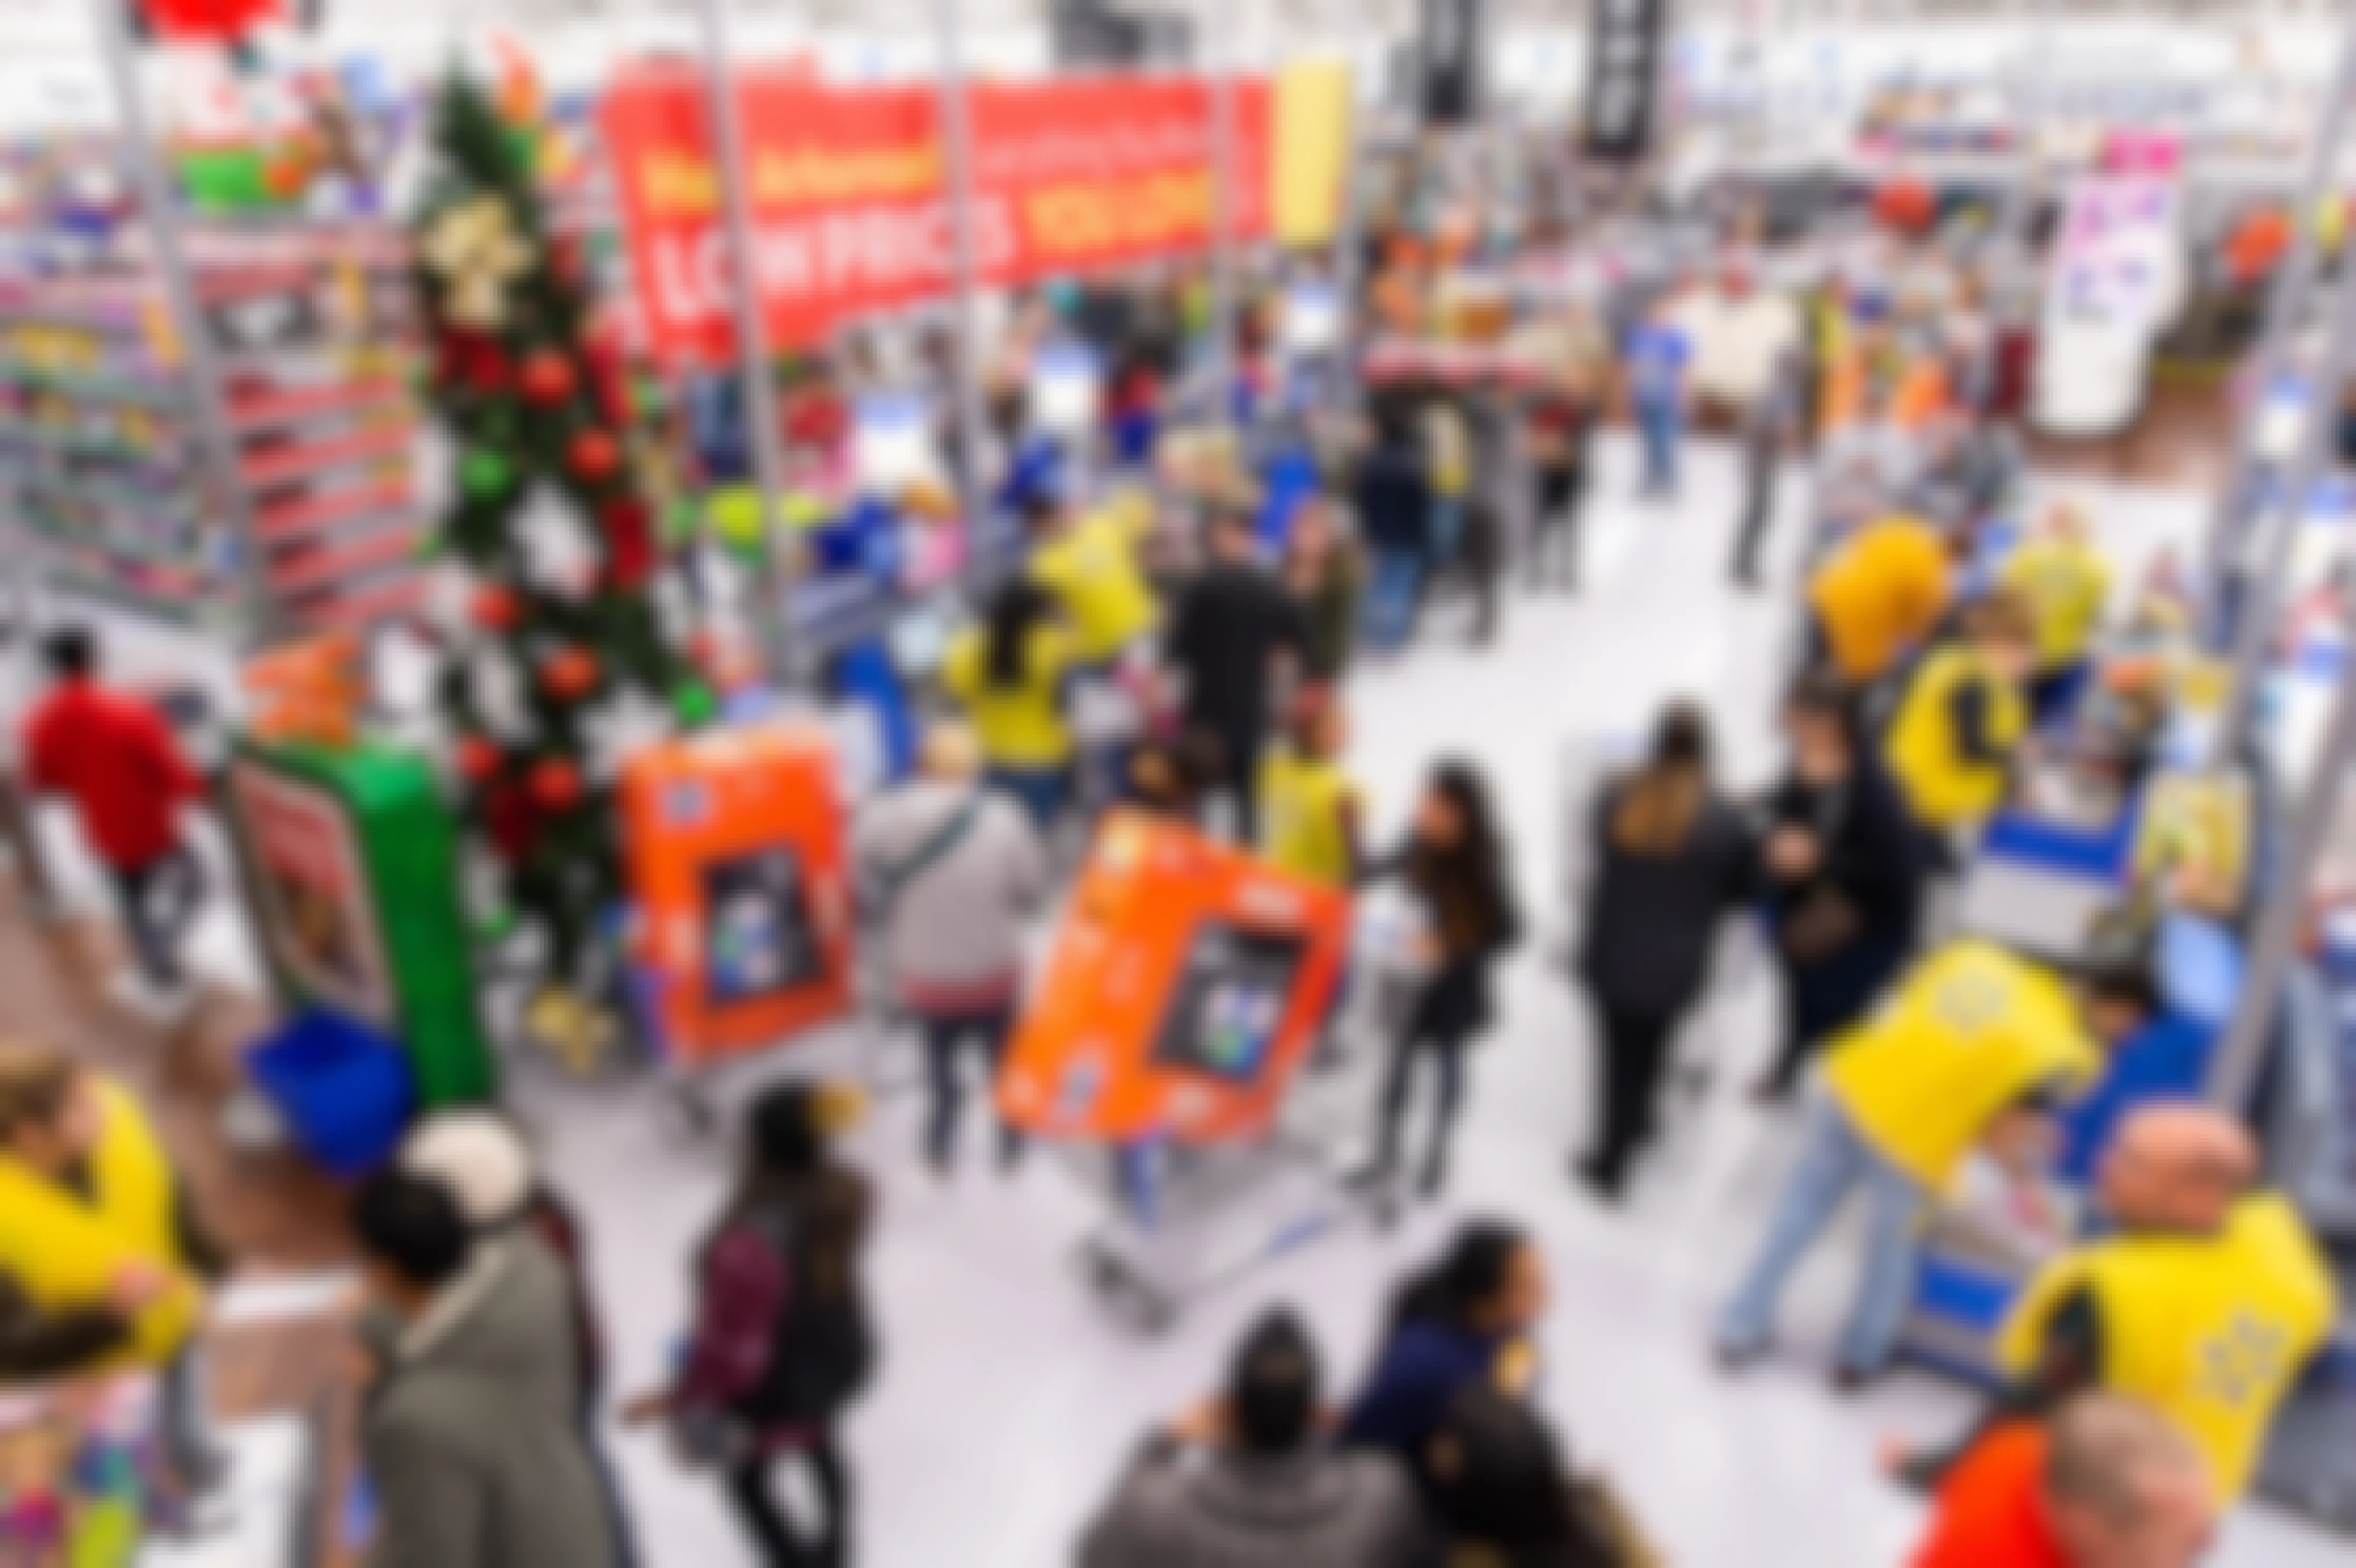 A crowd of people at Walmart checkout during Black Friday